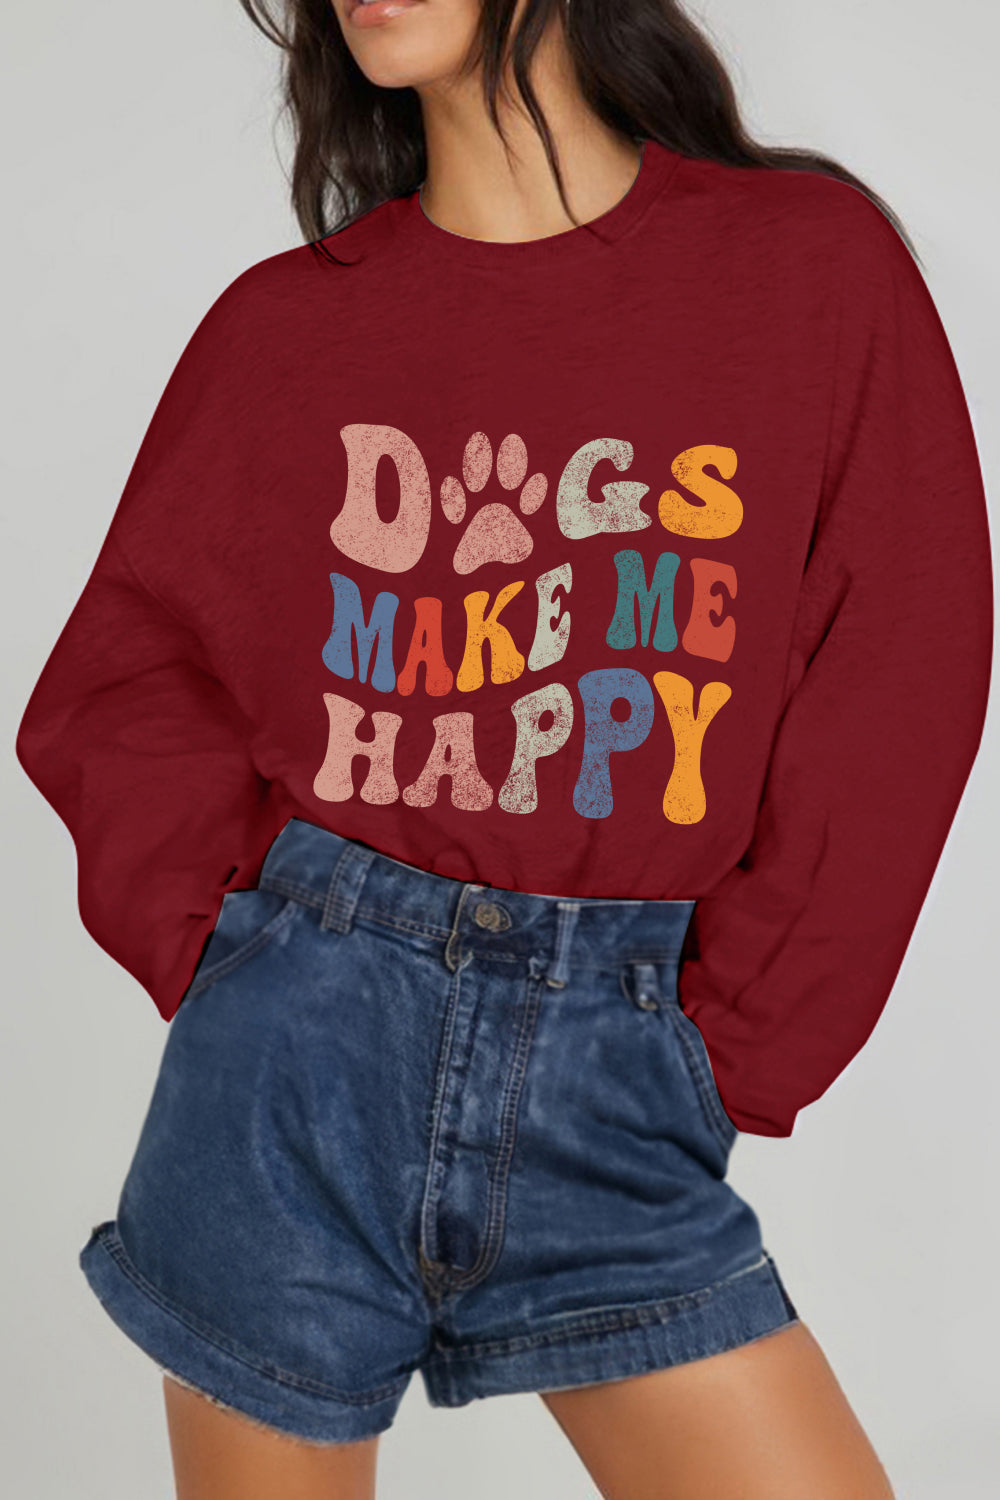 Simply Love Full Size DOGS MAKE ME HAPPY Graphic Sweatshirt